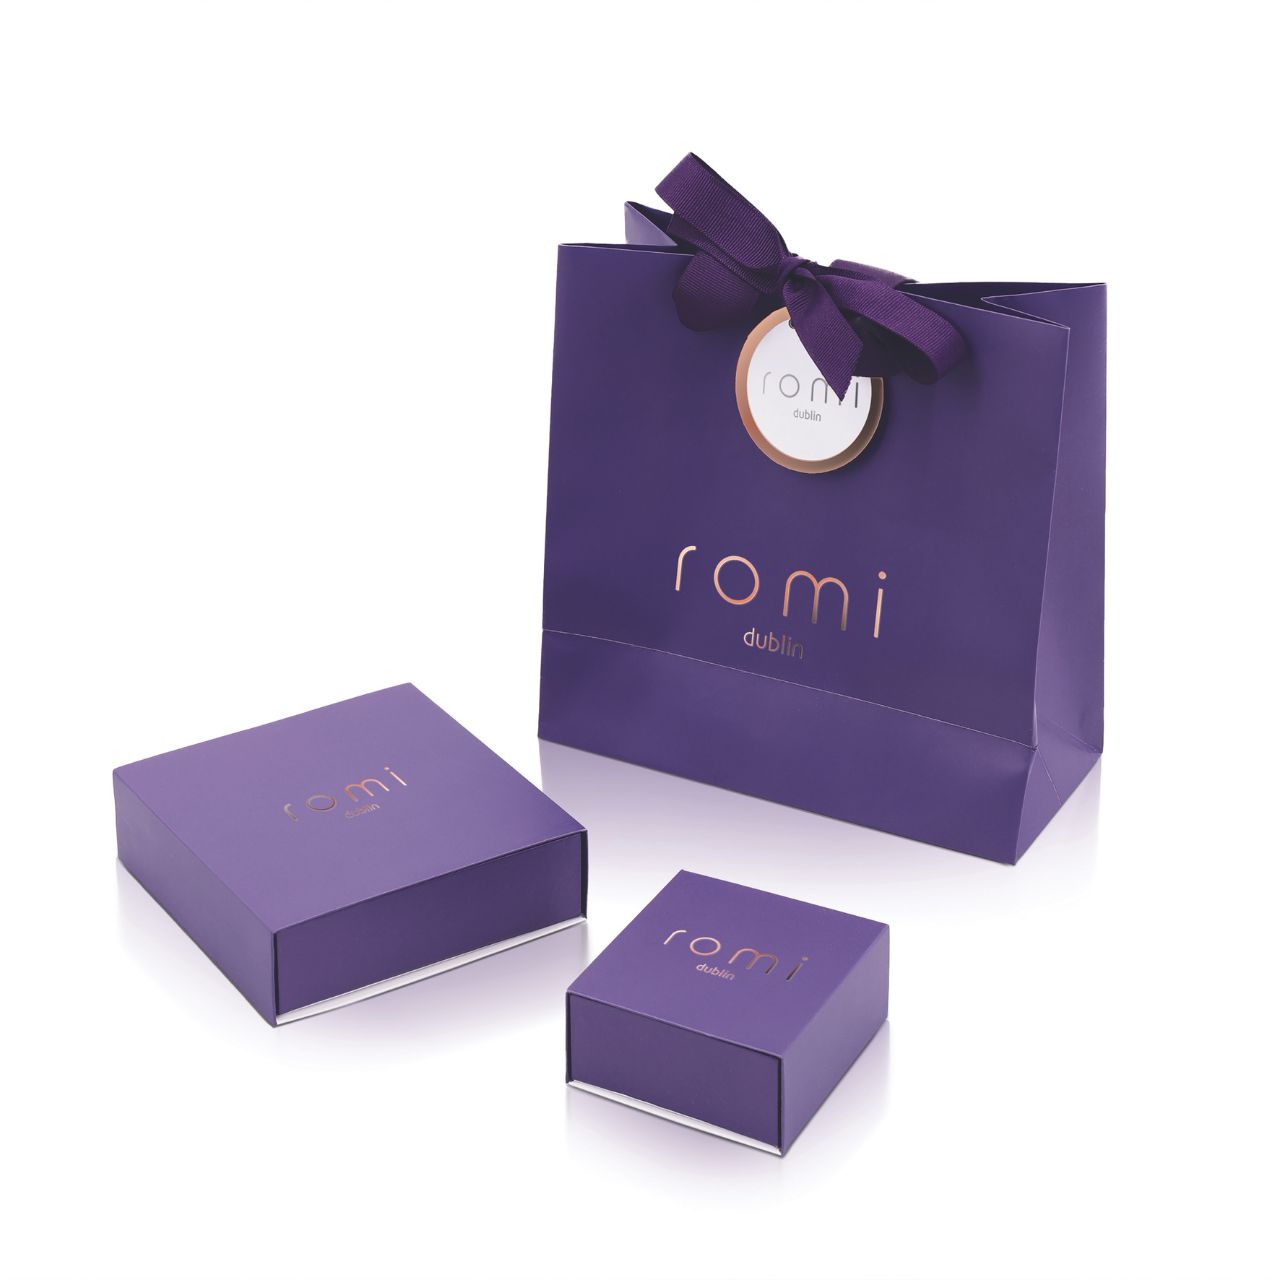 Romi Dublin Disc Chain Bracelet Silver  This easy-to-wear jewellery collection was inspired by daughter Romi who loves to style and accessorise. An outfit isn’t complete until the perfect pieces of jewellery and accessories have been selected to enhance it.